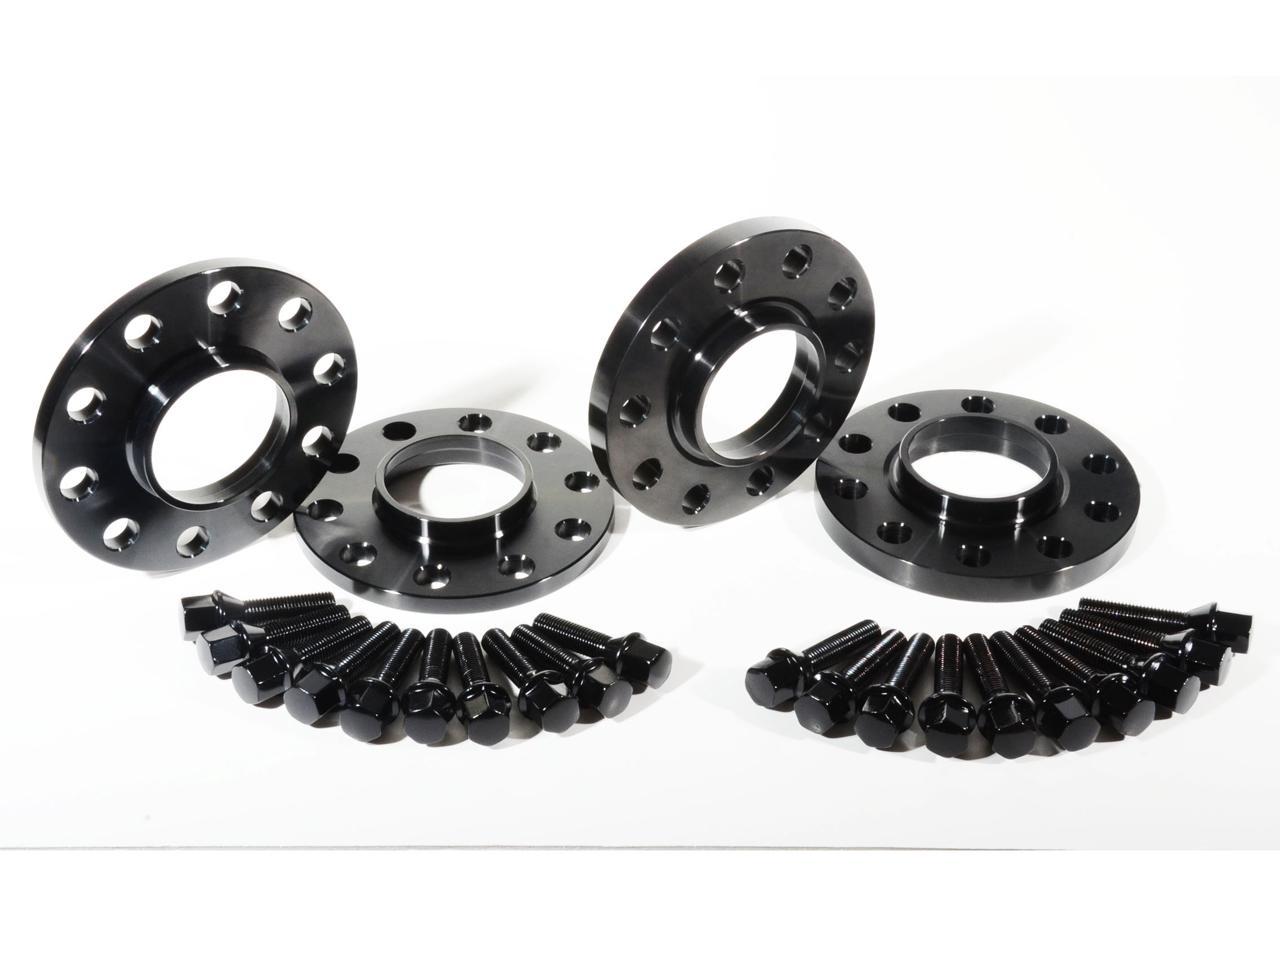 12mm & 15mm Hubcentric Wheel Spacers Adapter For BMW 750i